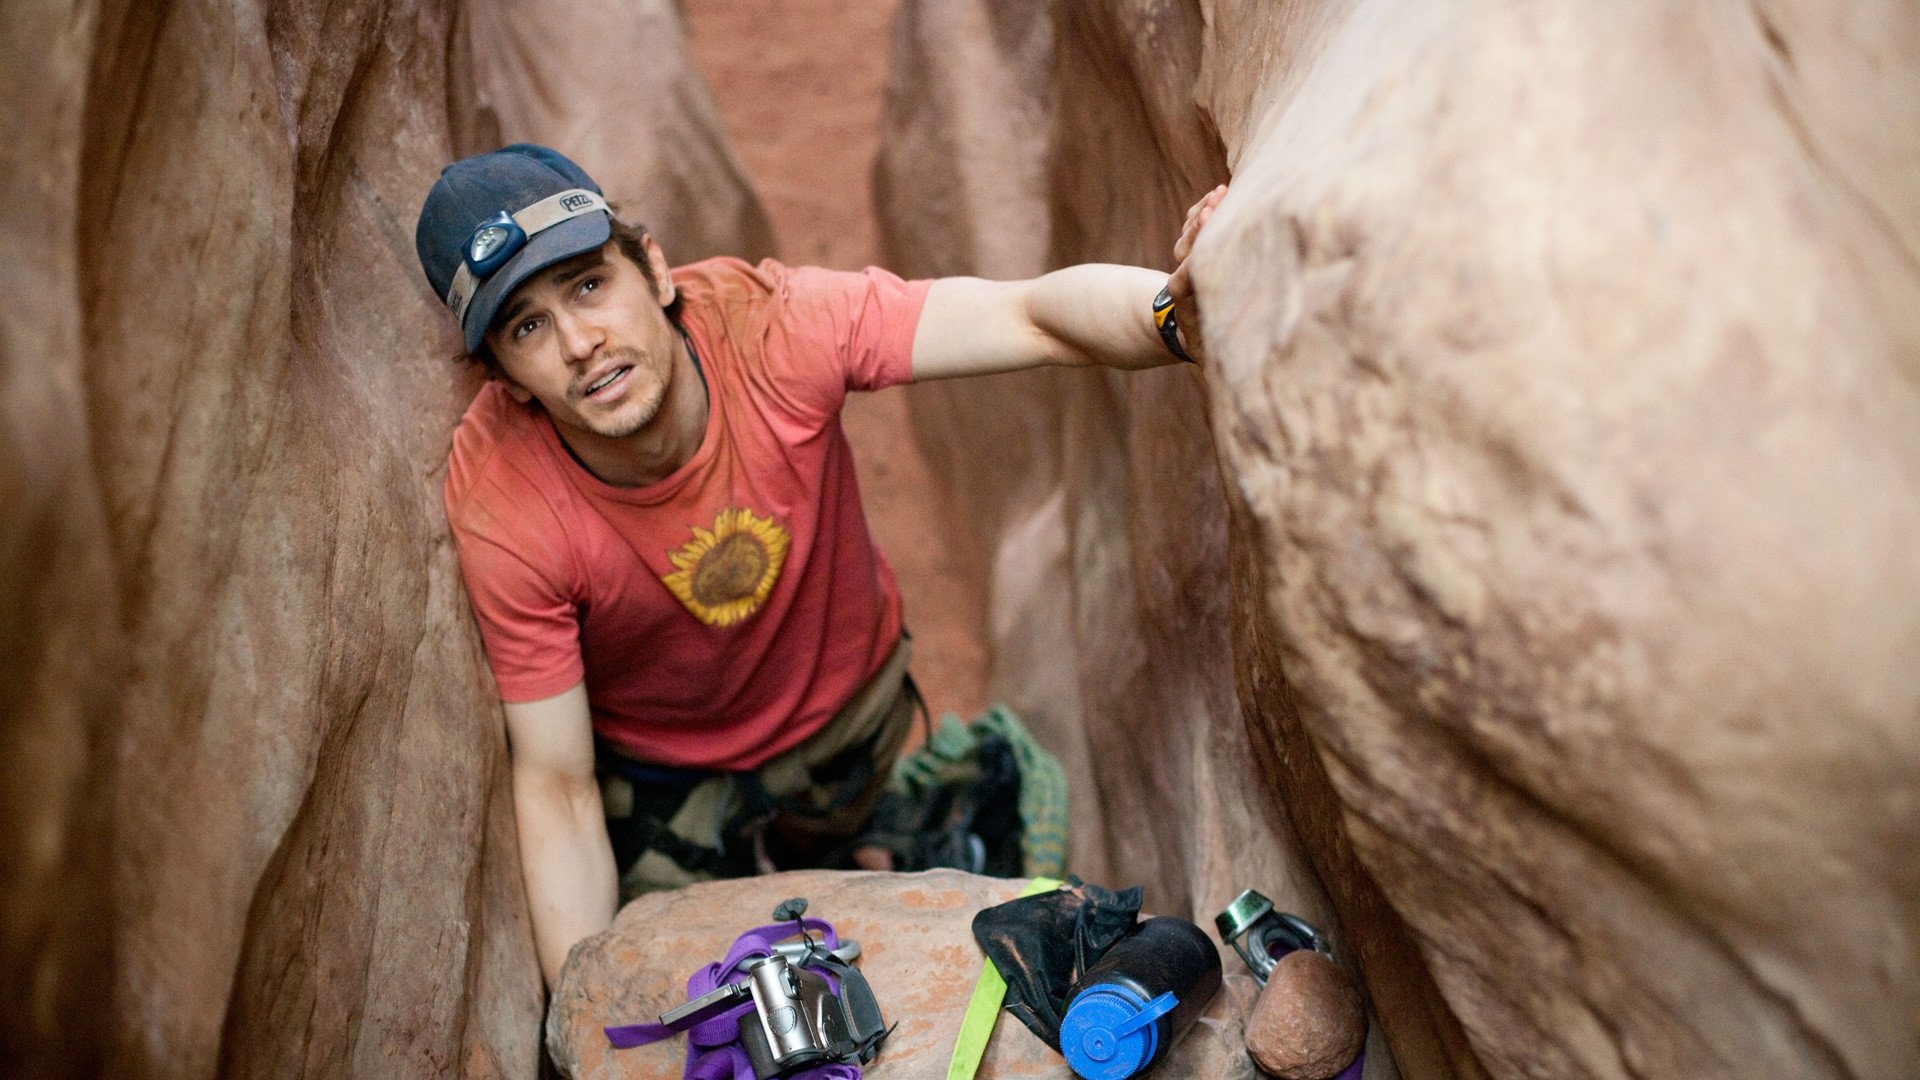 127 Hours: James Franco as Aron Ralston, known for cutting off part of his right arm. 1920x1080 Full HD Wallpaper.